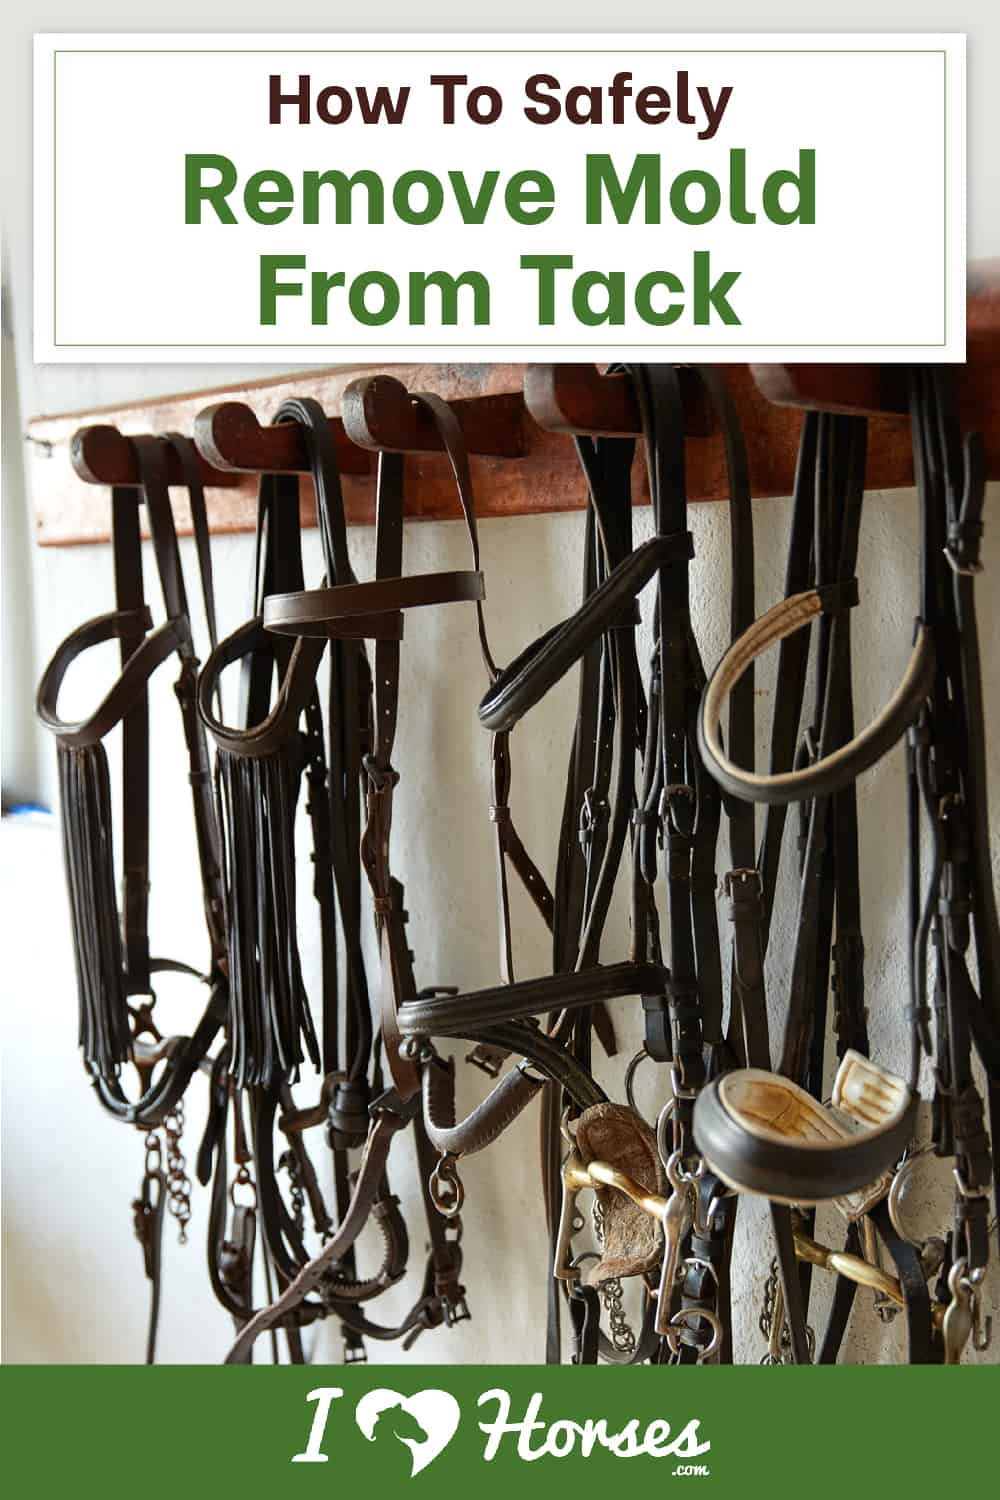 How To Safely Remove Mold From Tack